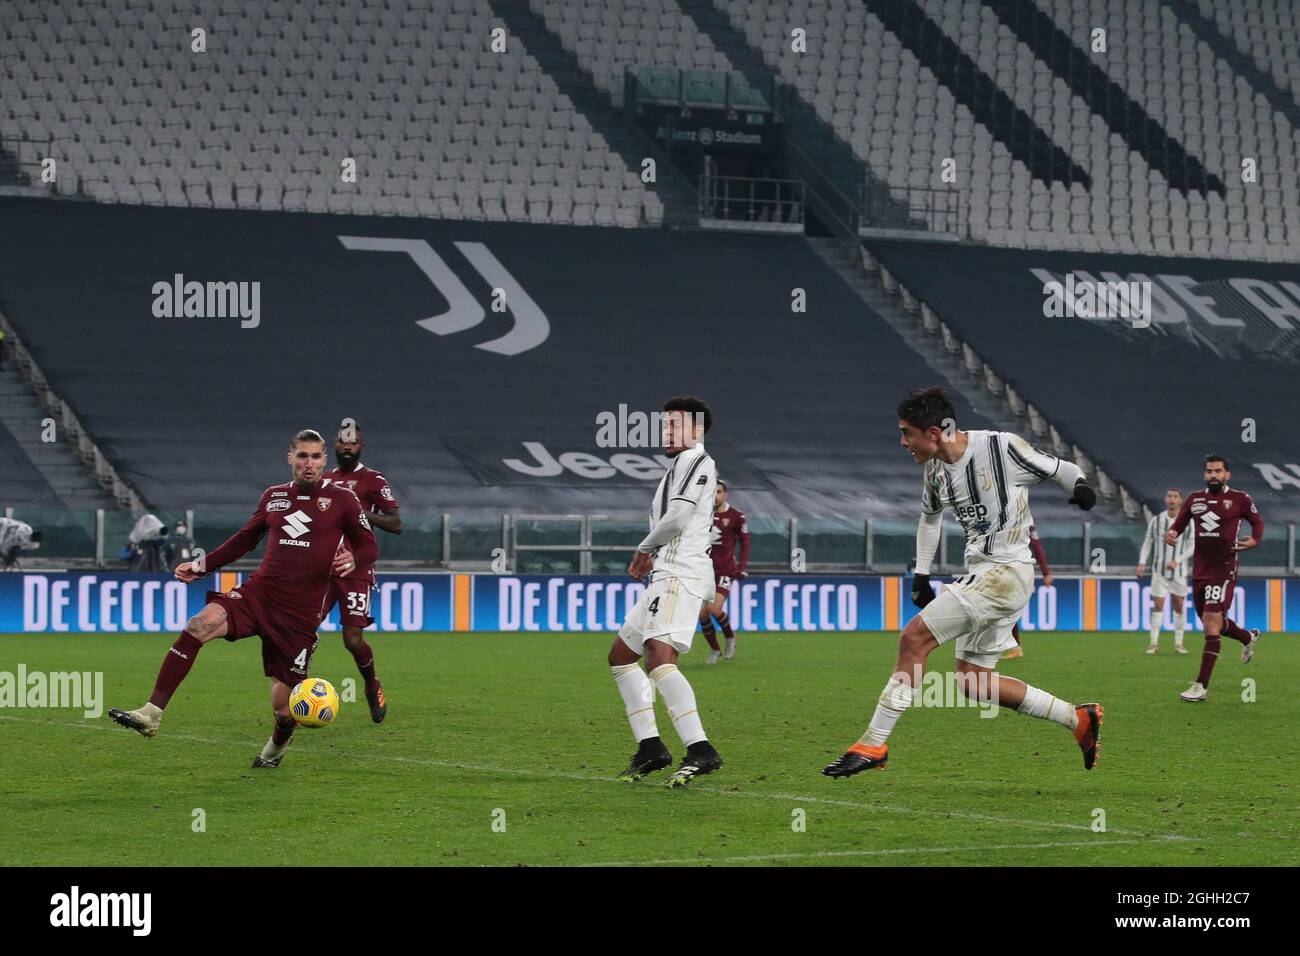 Paulo Dybala of Juventus fires a shot on goal which was well saved by Salvatore Sirigu of Torino FC during the Serie A match at Allianz Stadium, Turin. Picture date: 5th December 2020. Picture credit should read: Jonathan Moscrop/Sportimage via PA Images Stock Photo